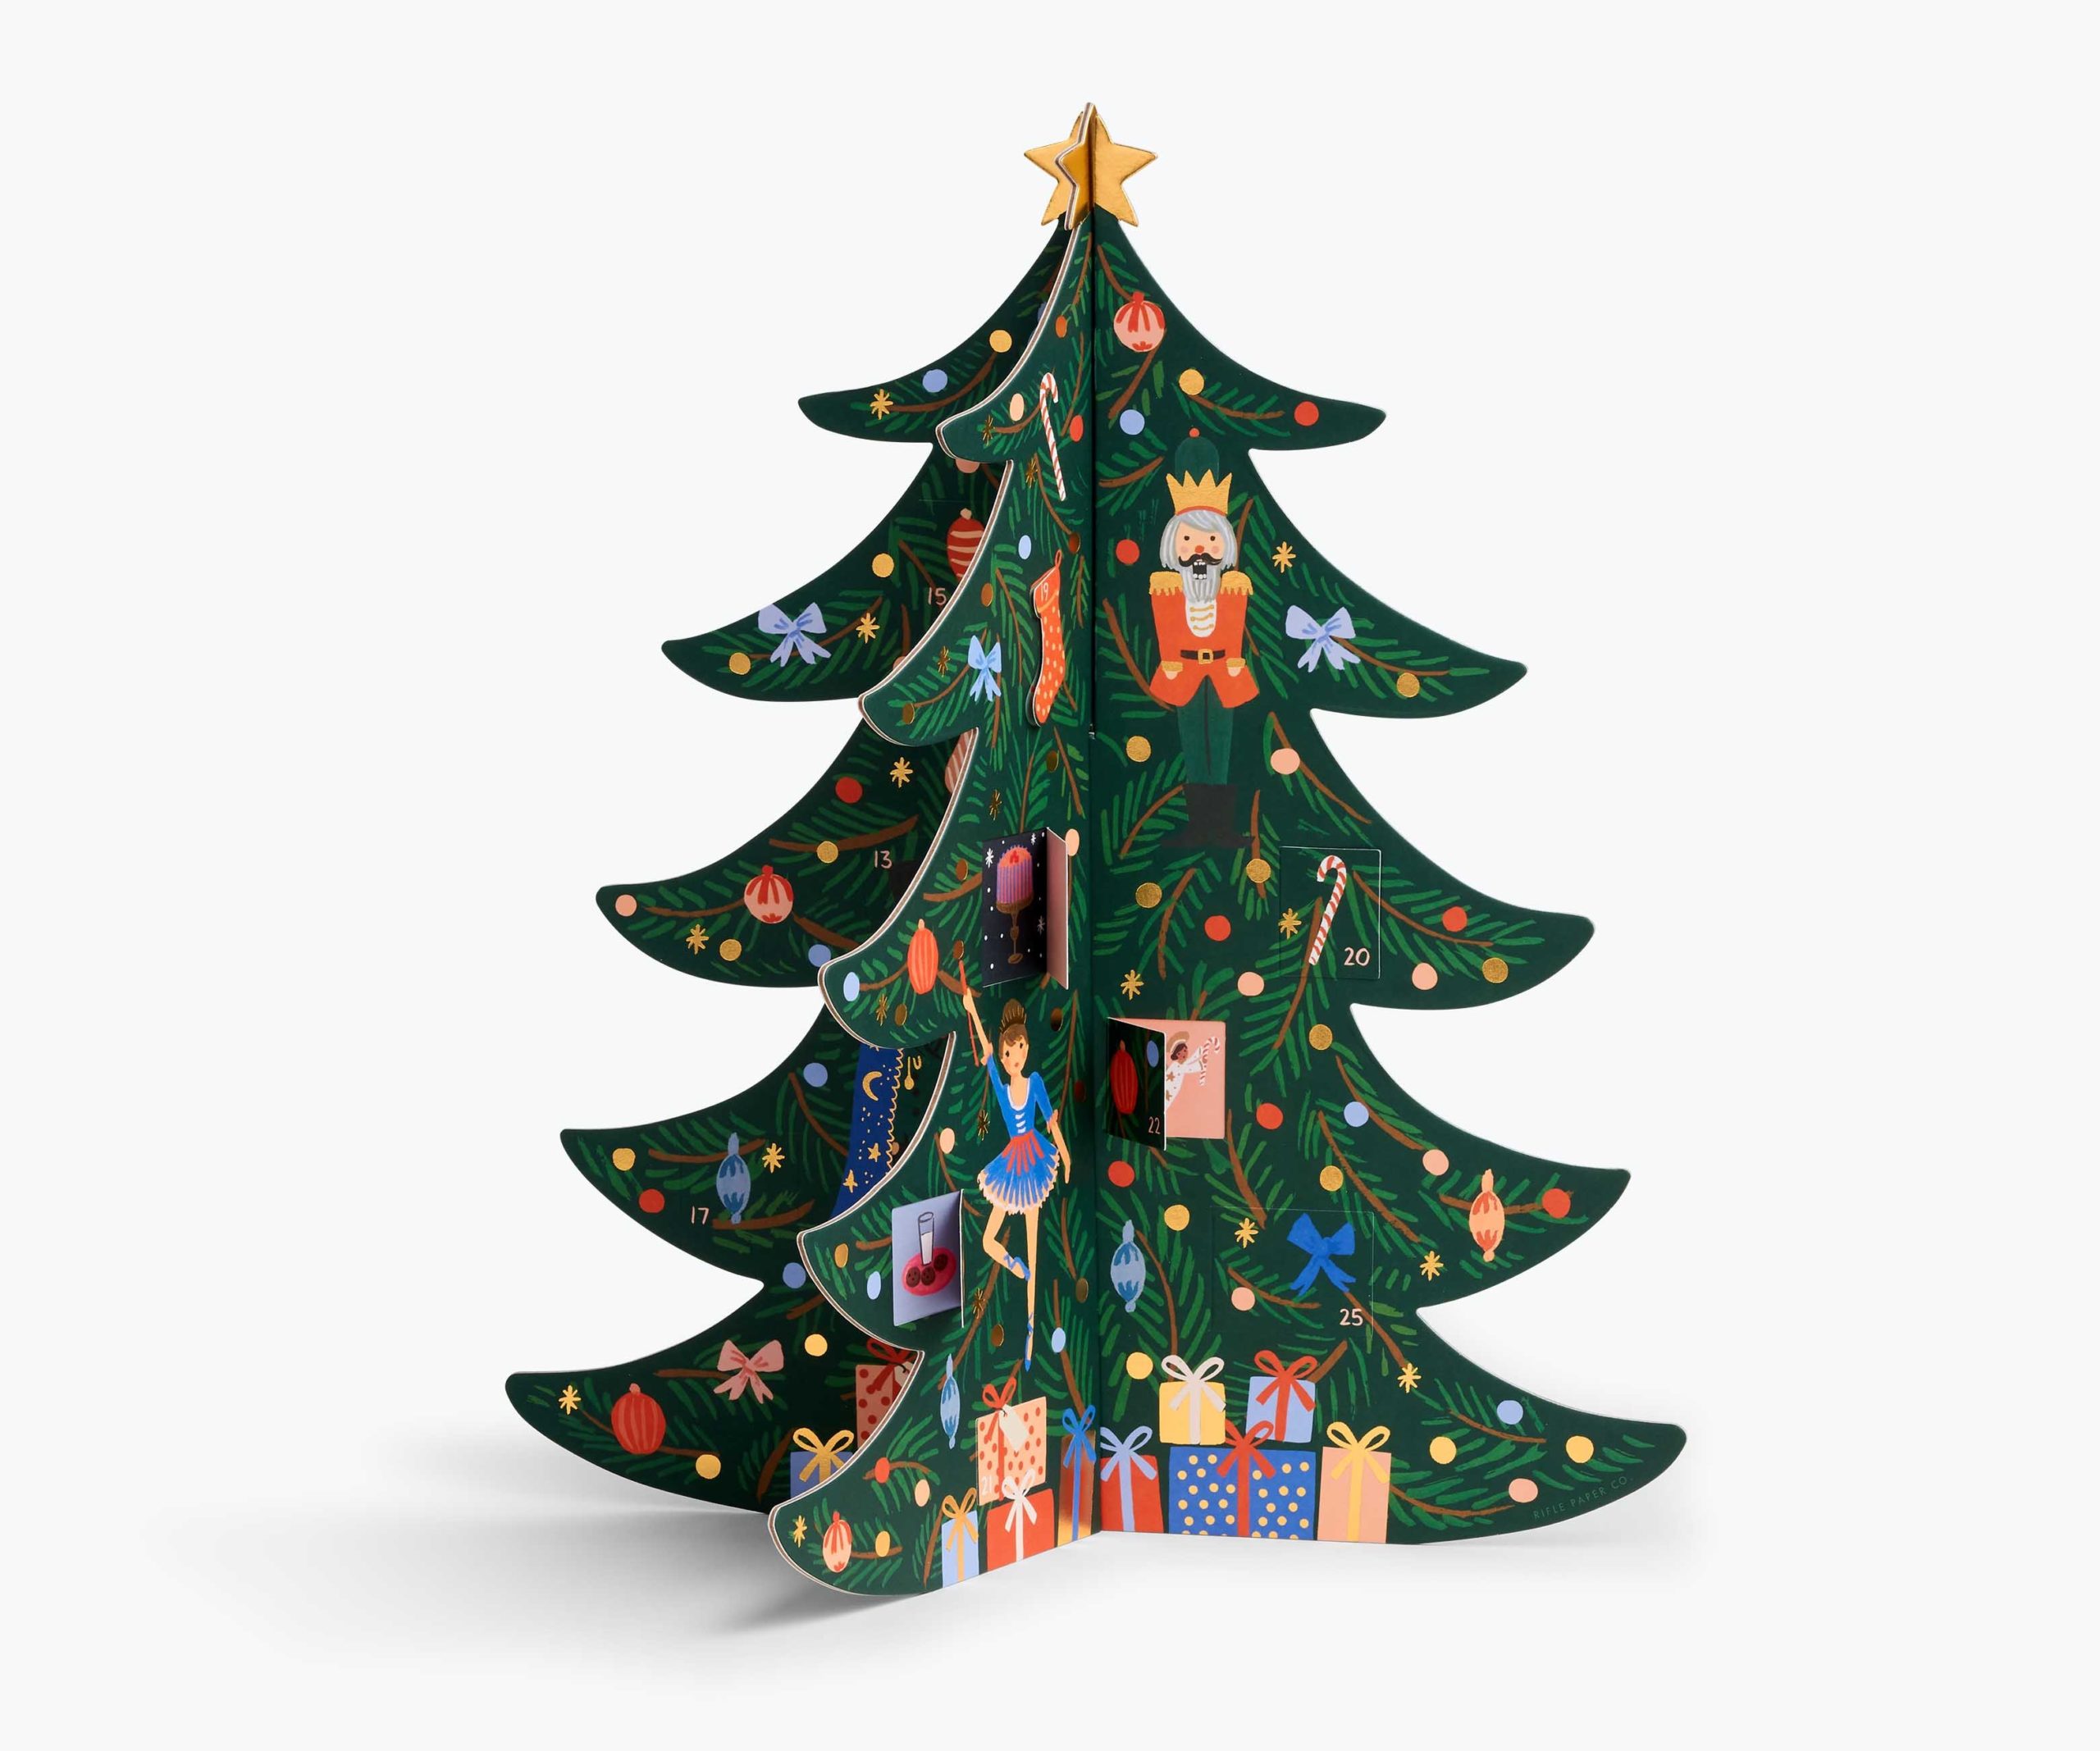 Coolest advent calendars | Rifle Paper Co. Christmas Tree